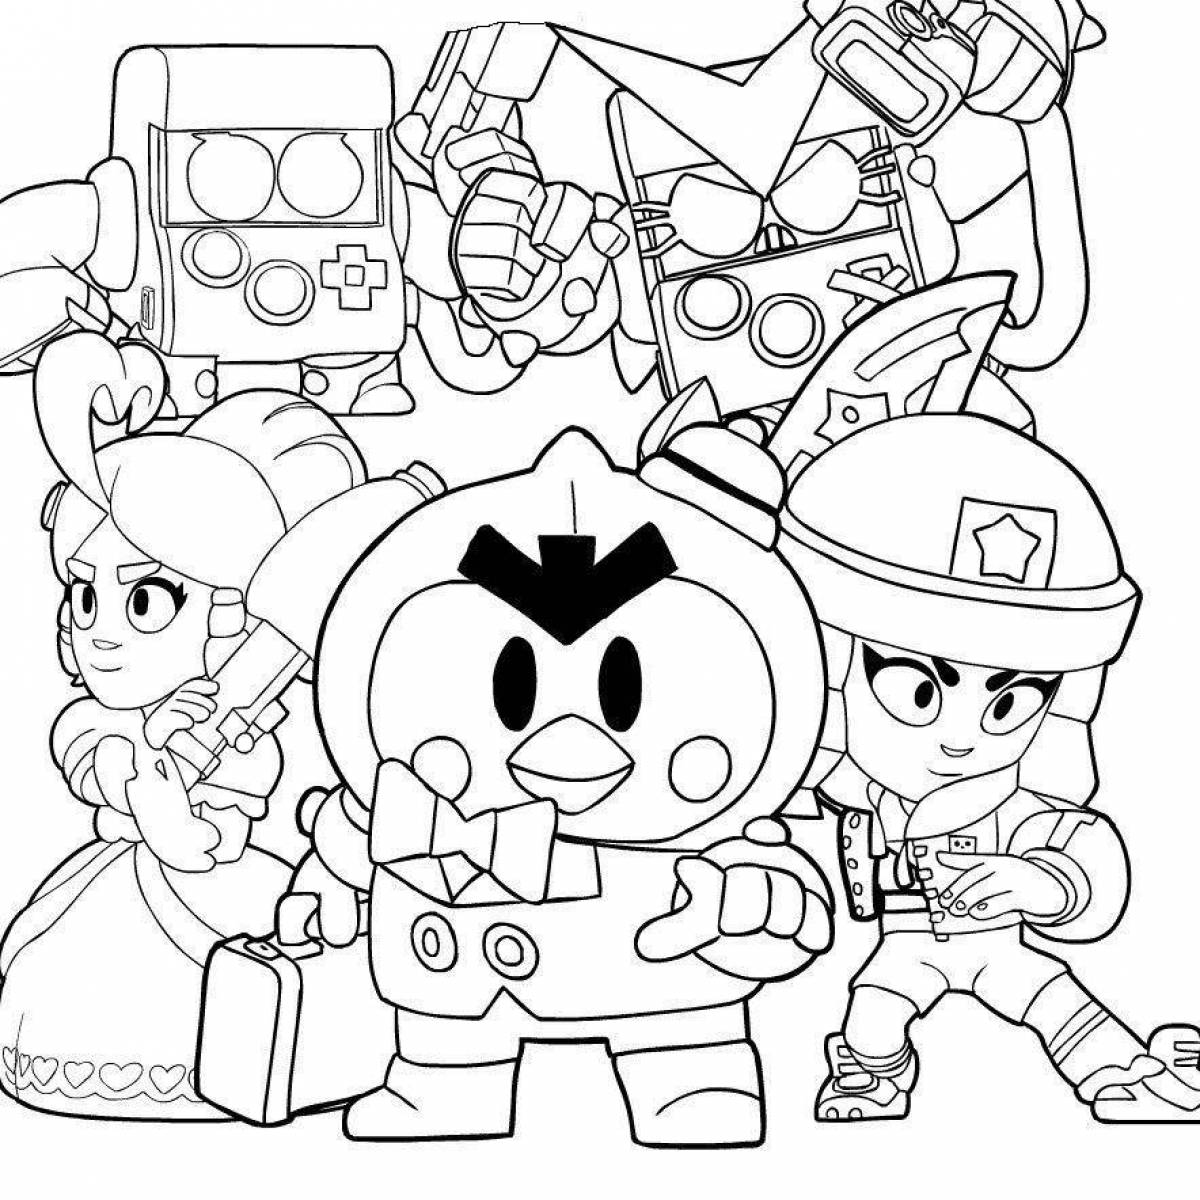 Mysterious fan coloring book